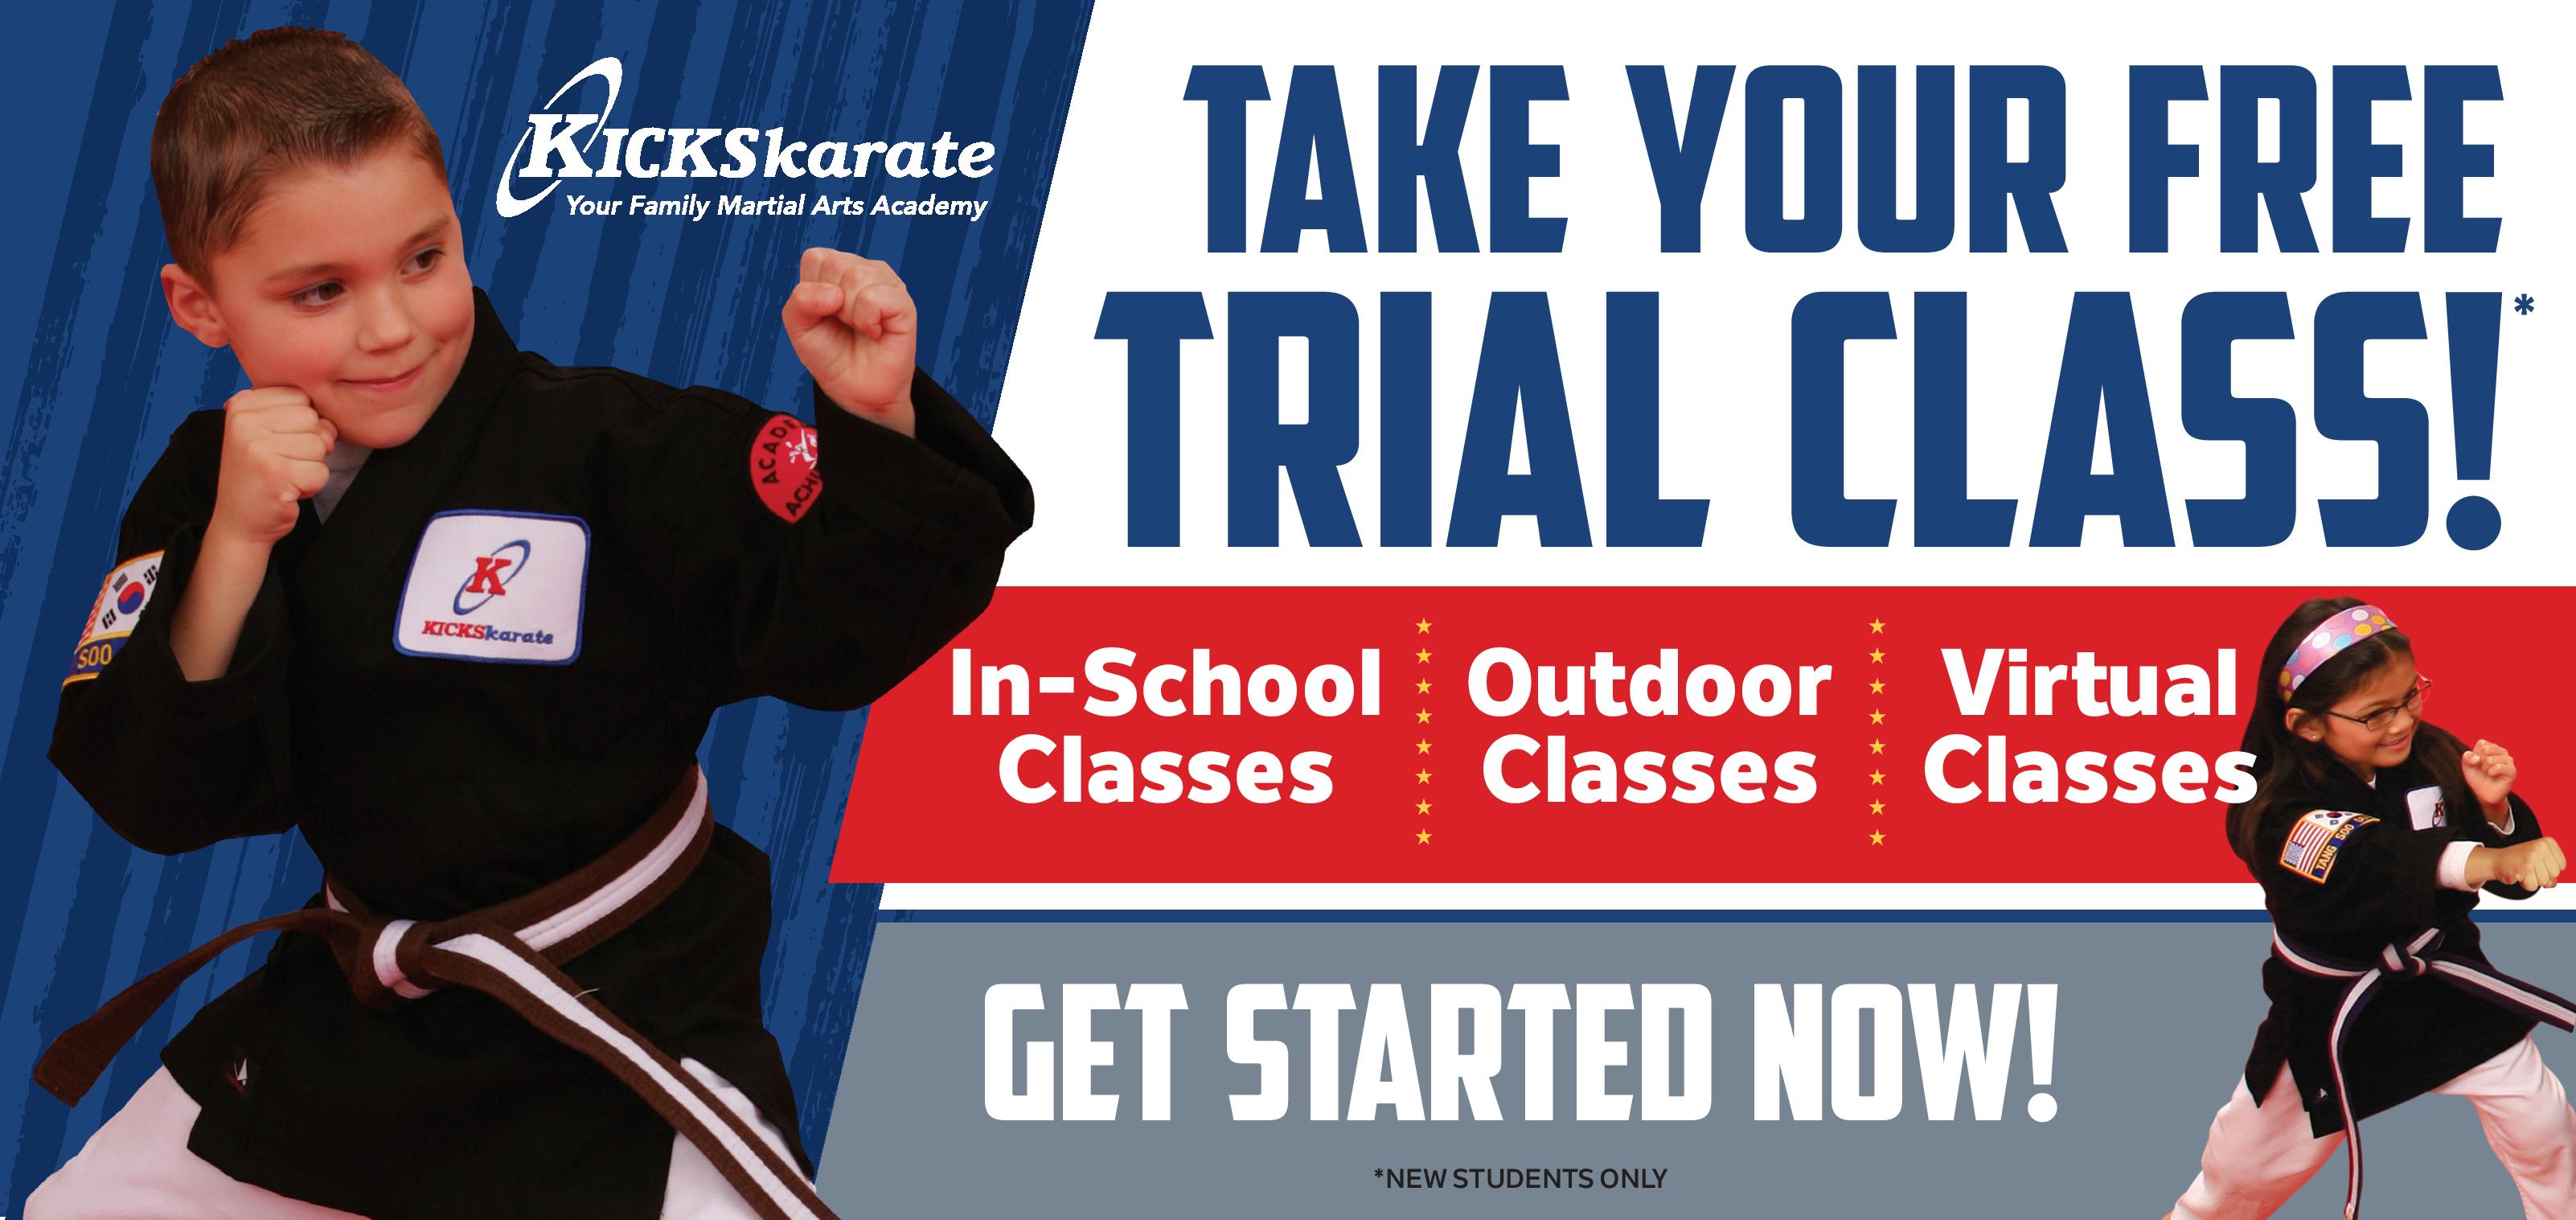 Sign up for our karate or kickboxing intro class today